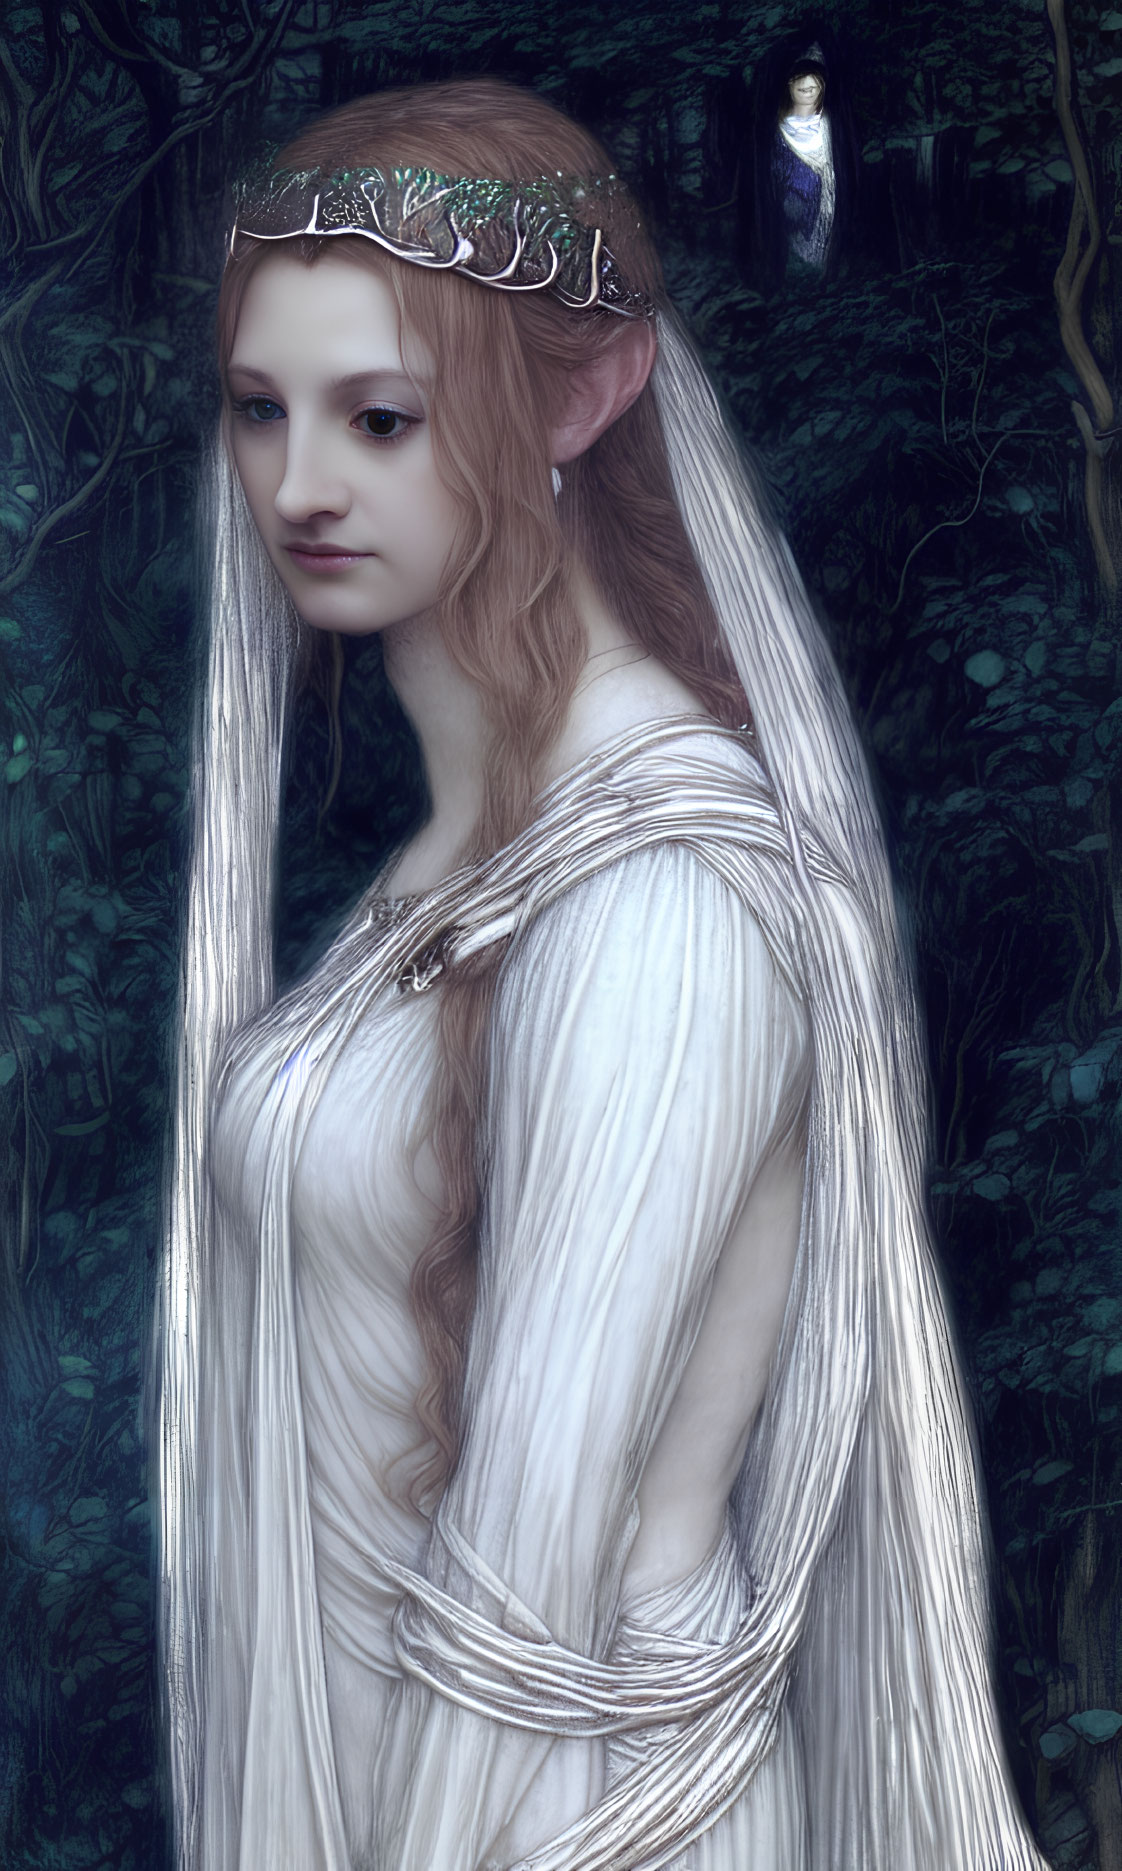 Elf woman with white hair in silver gown and tiara in mystical forest with owl